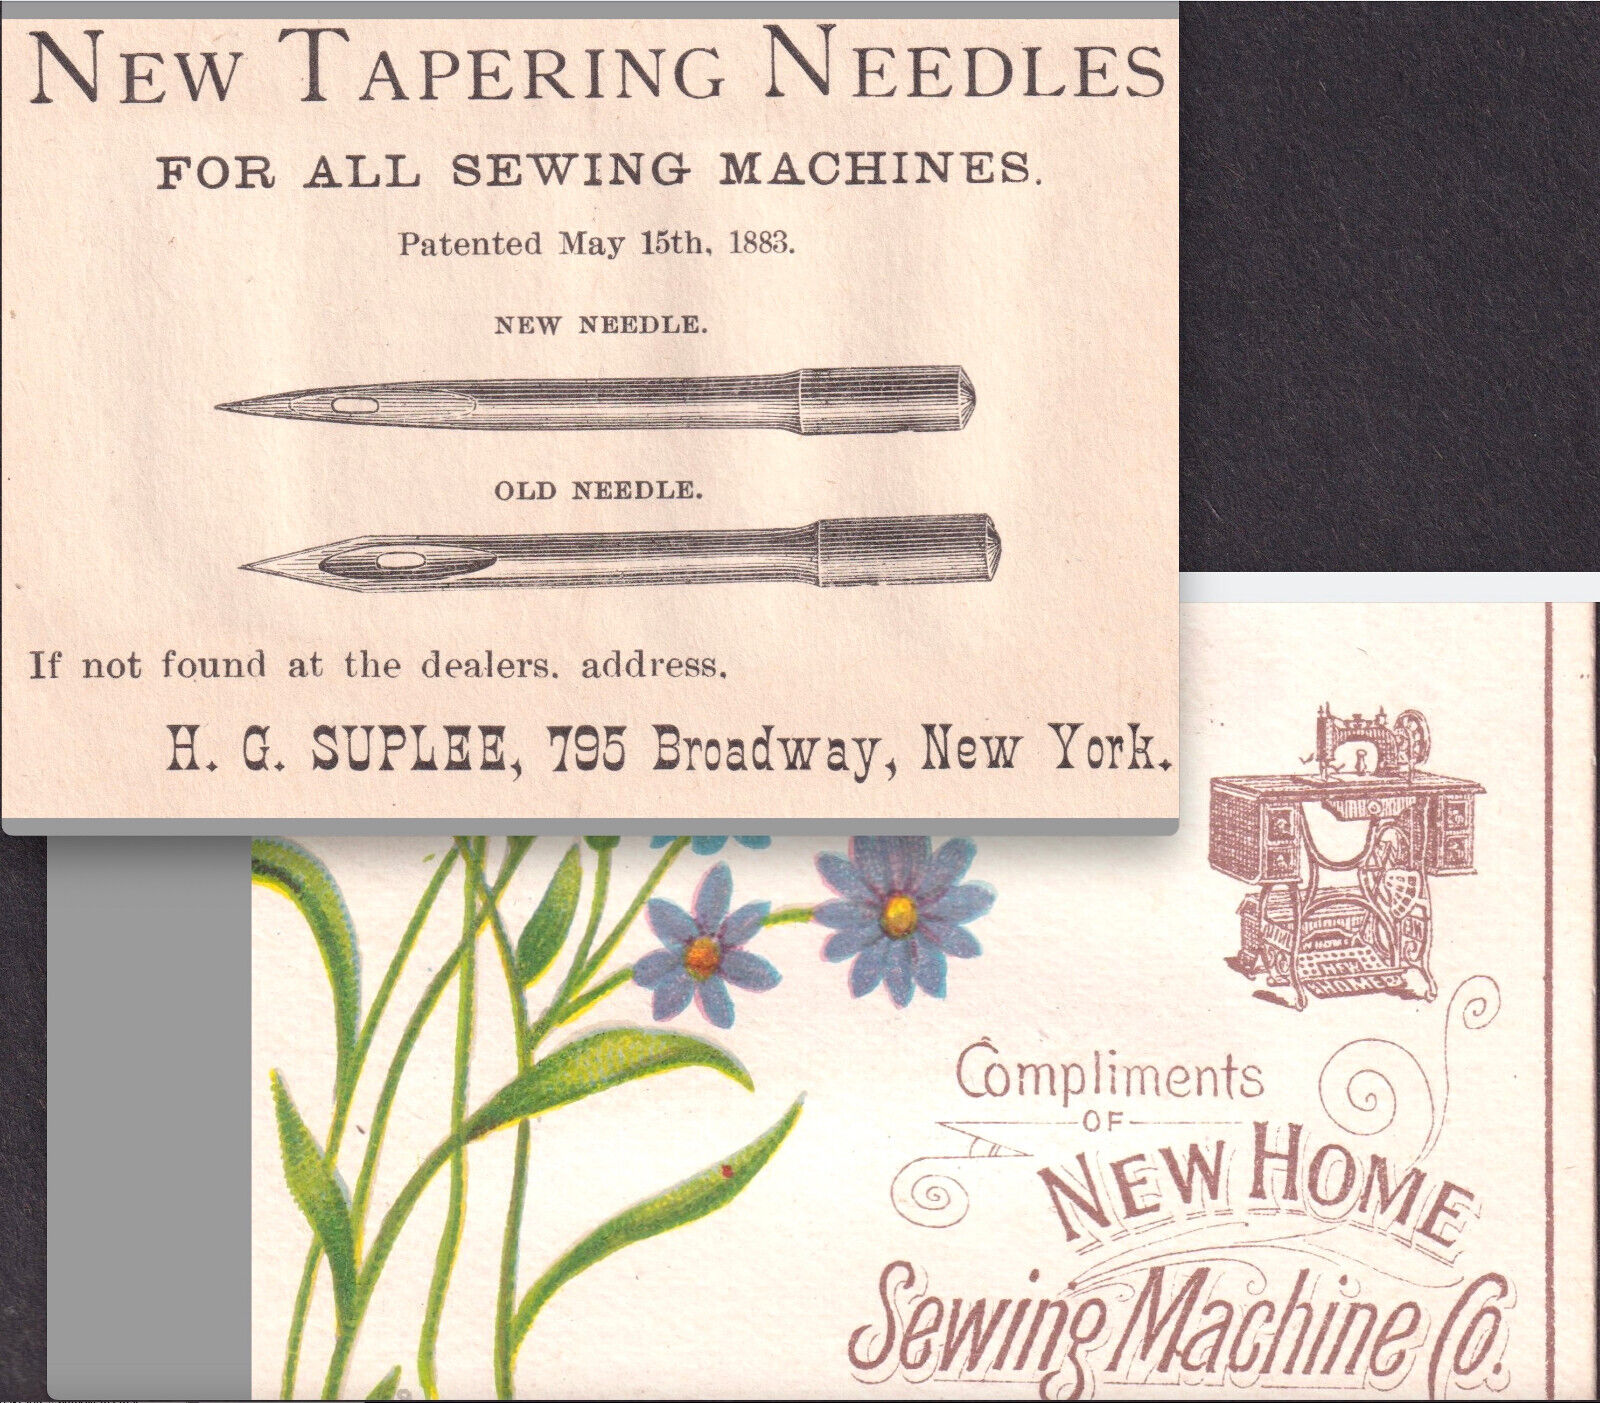 Pat. 1883 Suplee New York Tapering Sewing Machine Needle Ad Victorian Trade Card